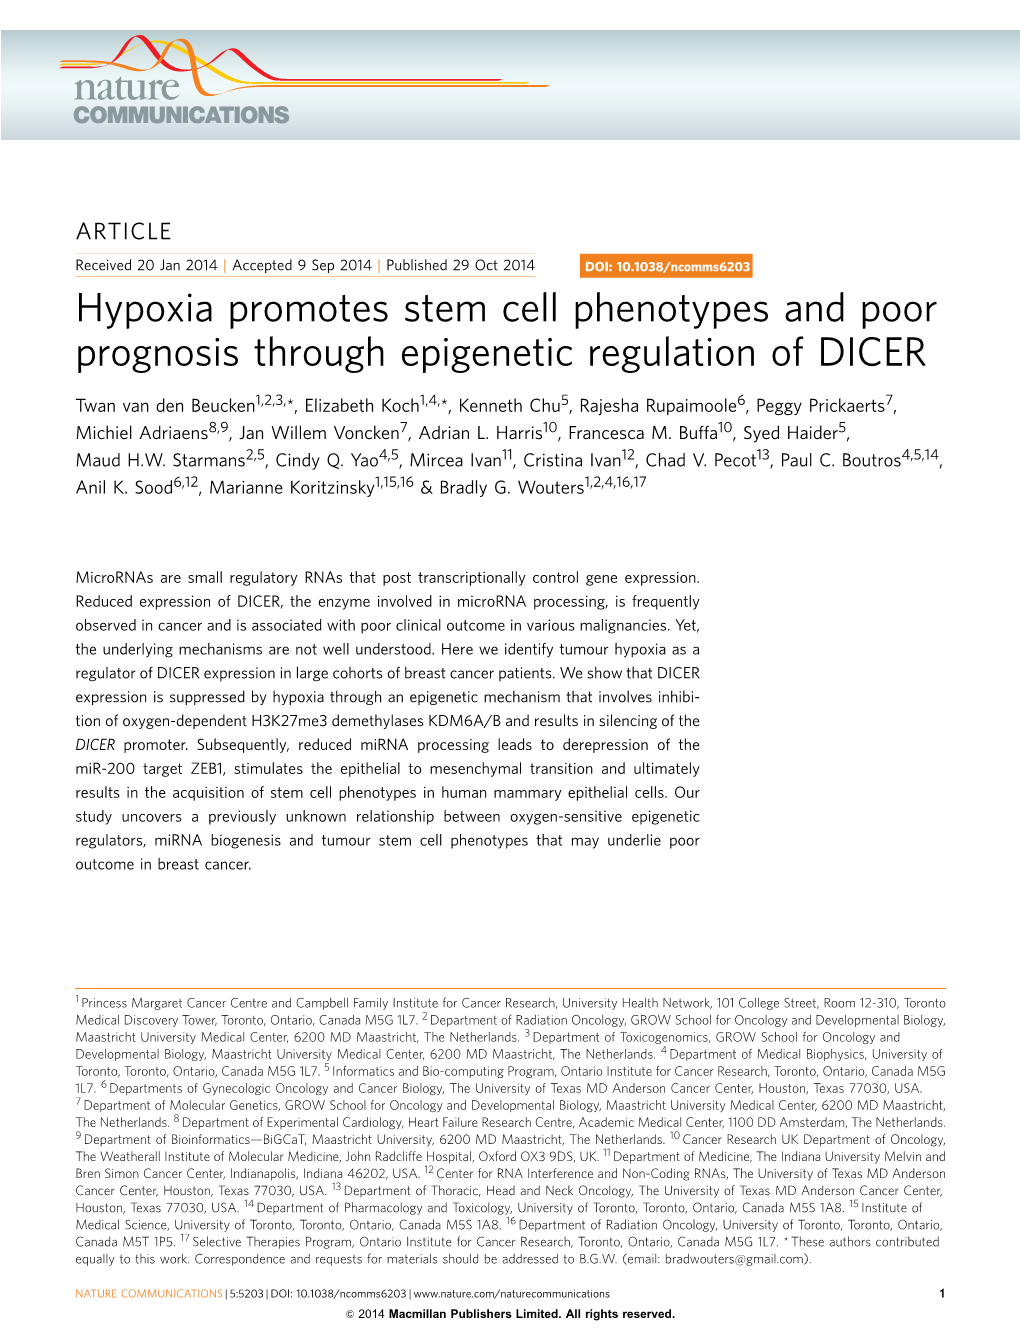 Hypoxia Promotes Stem Cell Phenotypes and Poor Prognosis Through Epigenetic Regulation of DICER